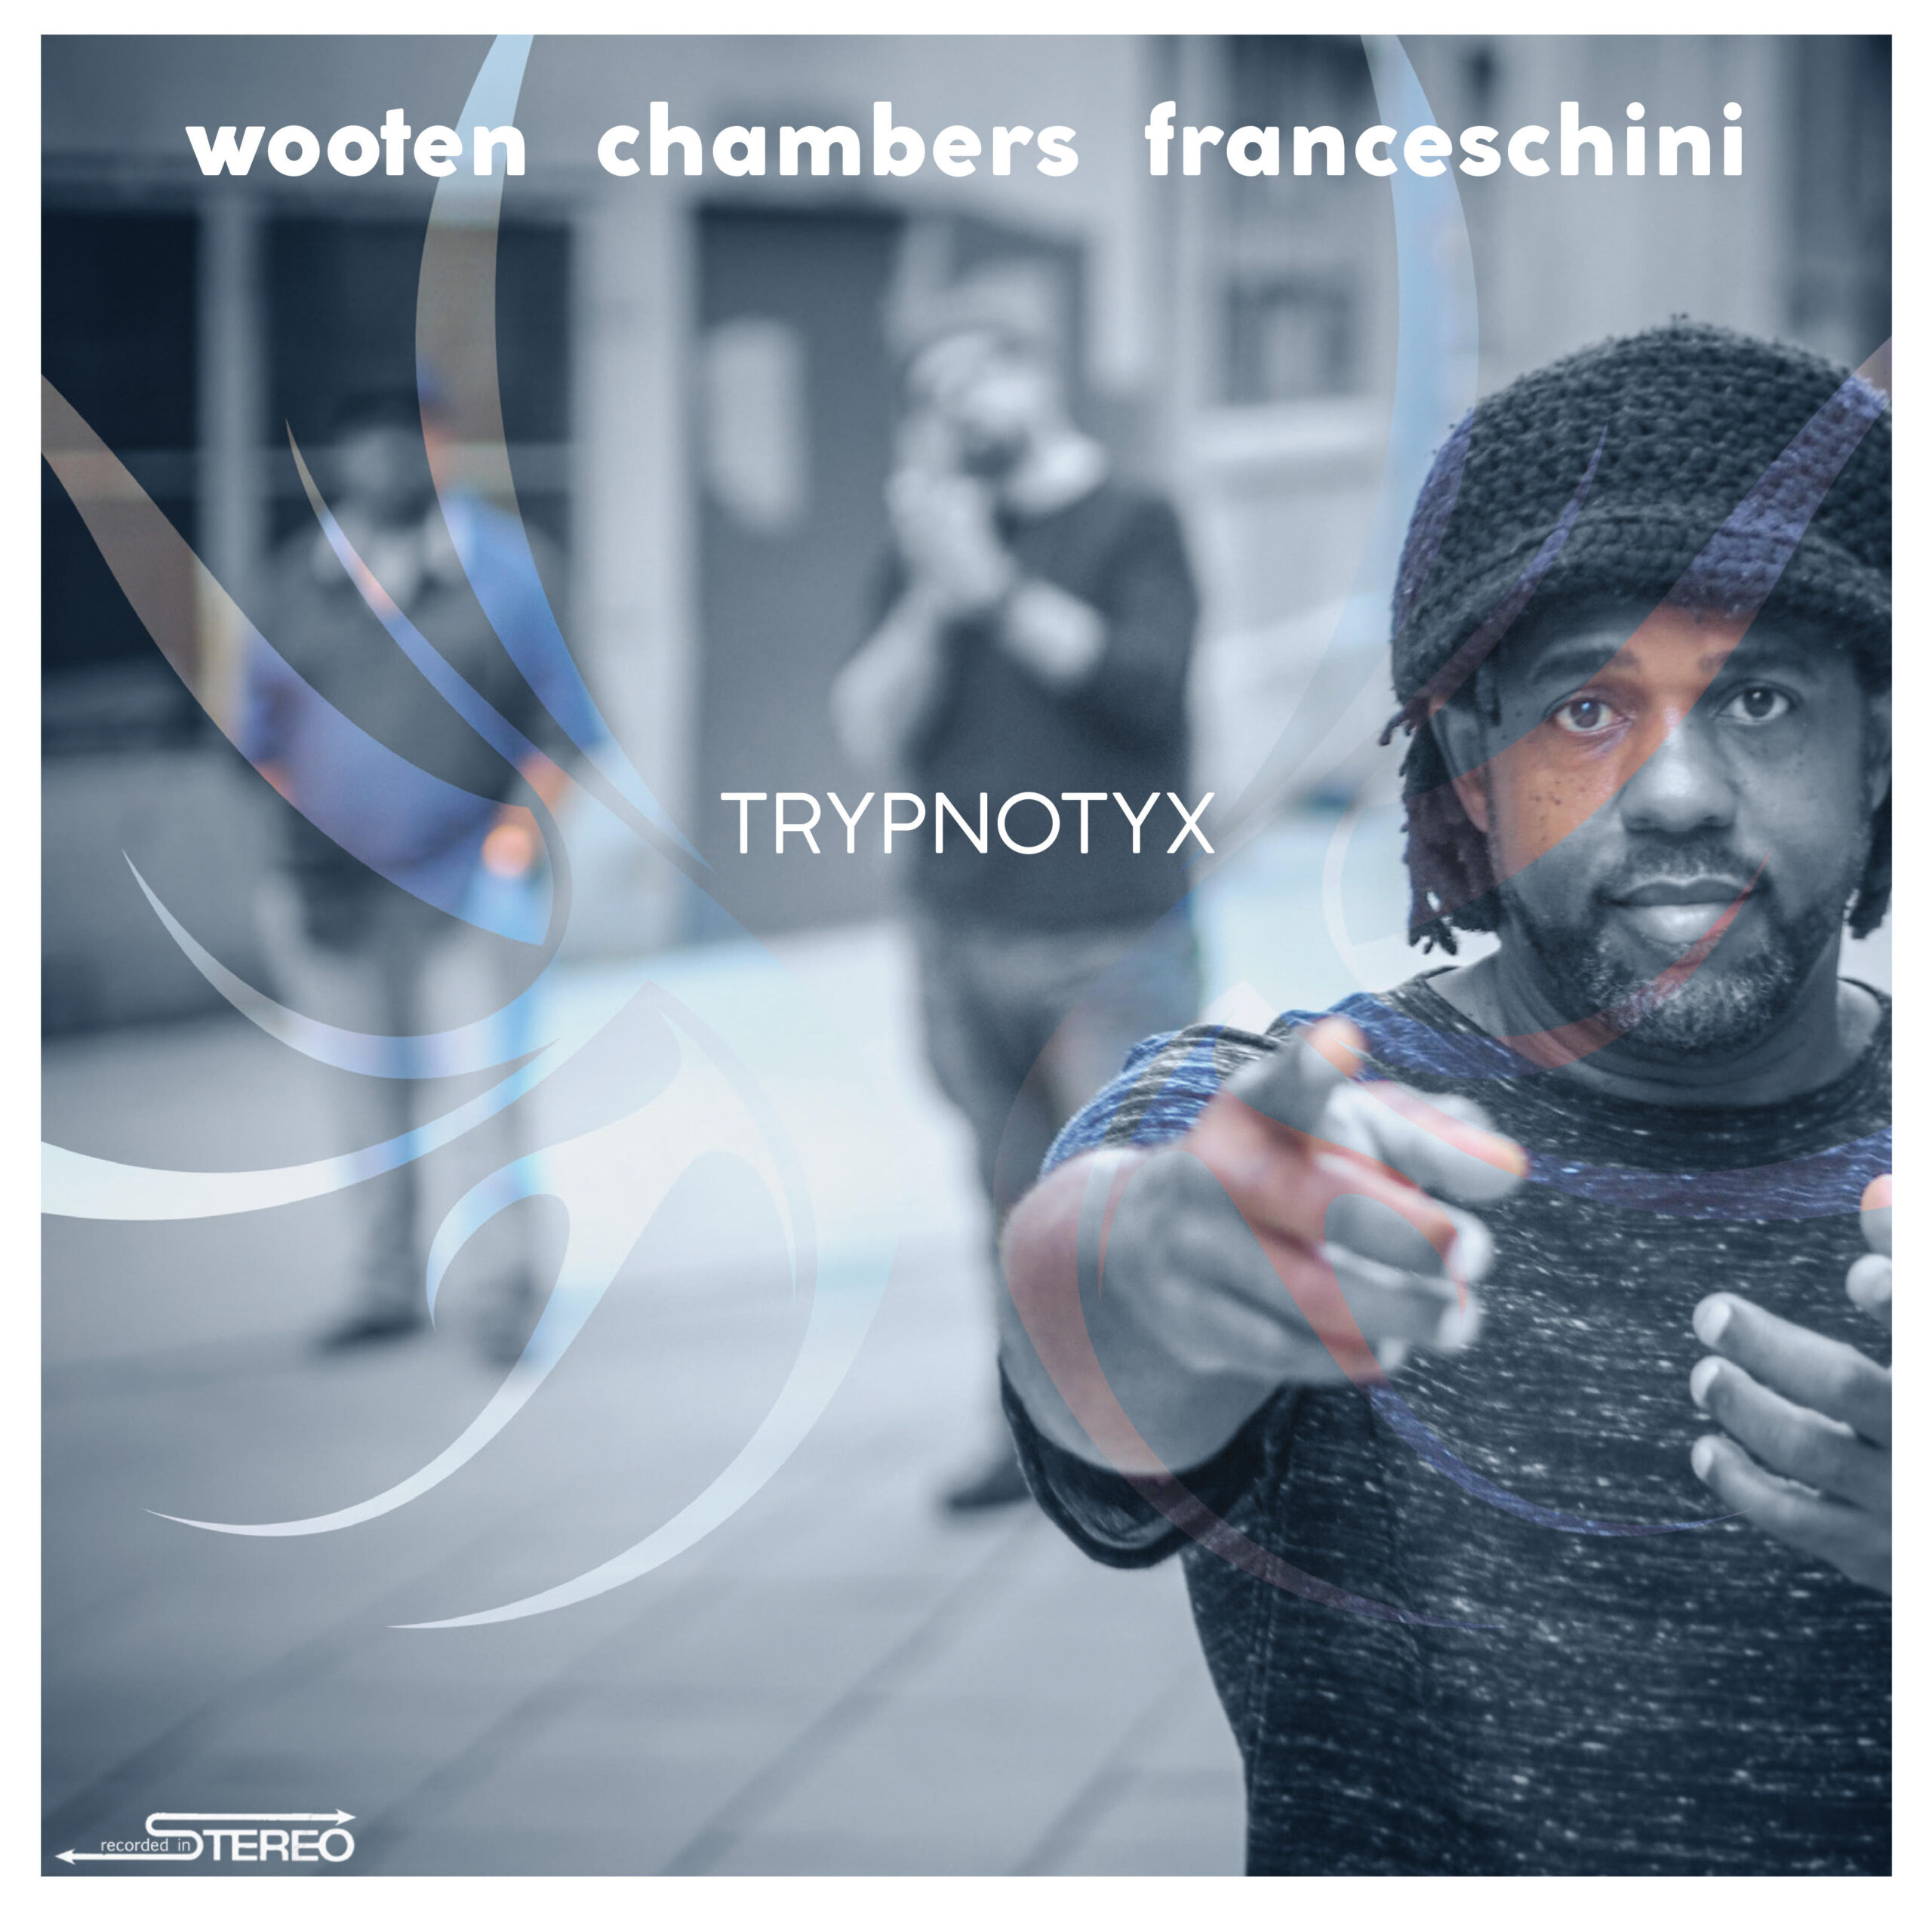 Victor Wooten album cover art for TRYPNOTYX. Photo provided.